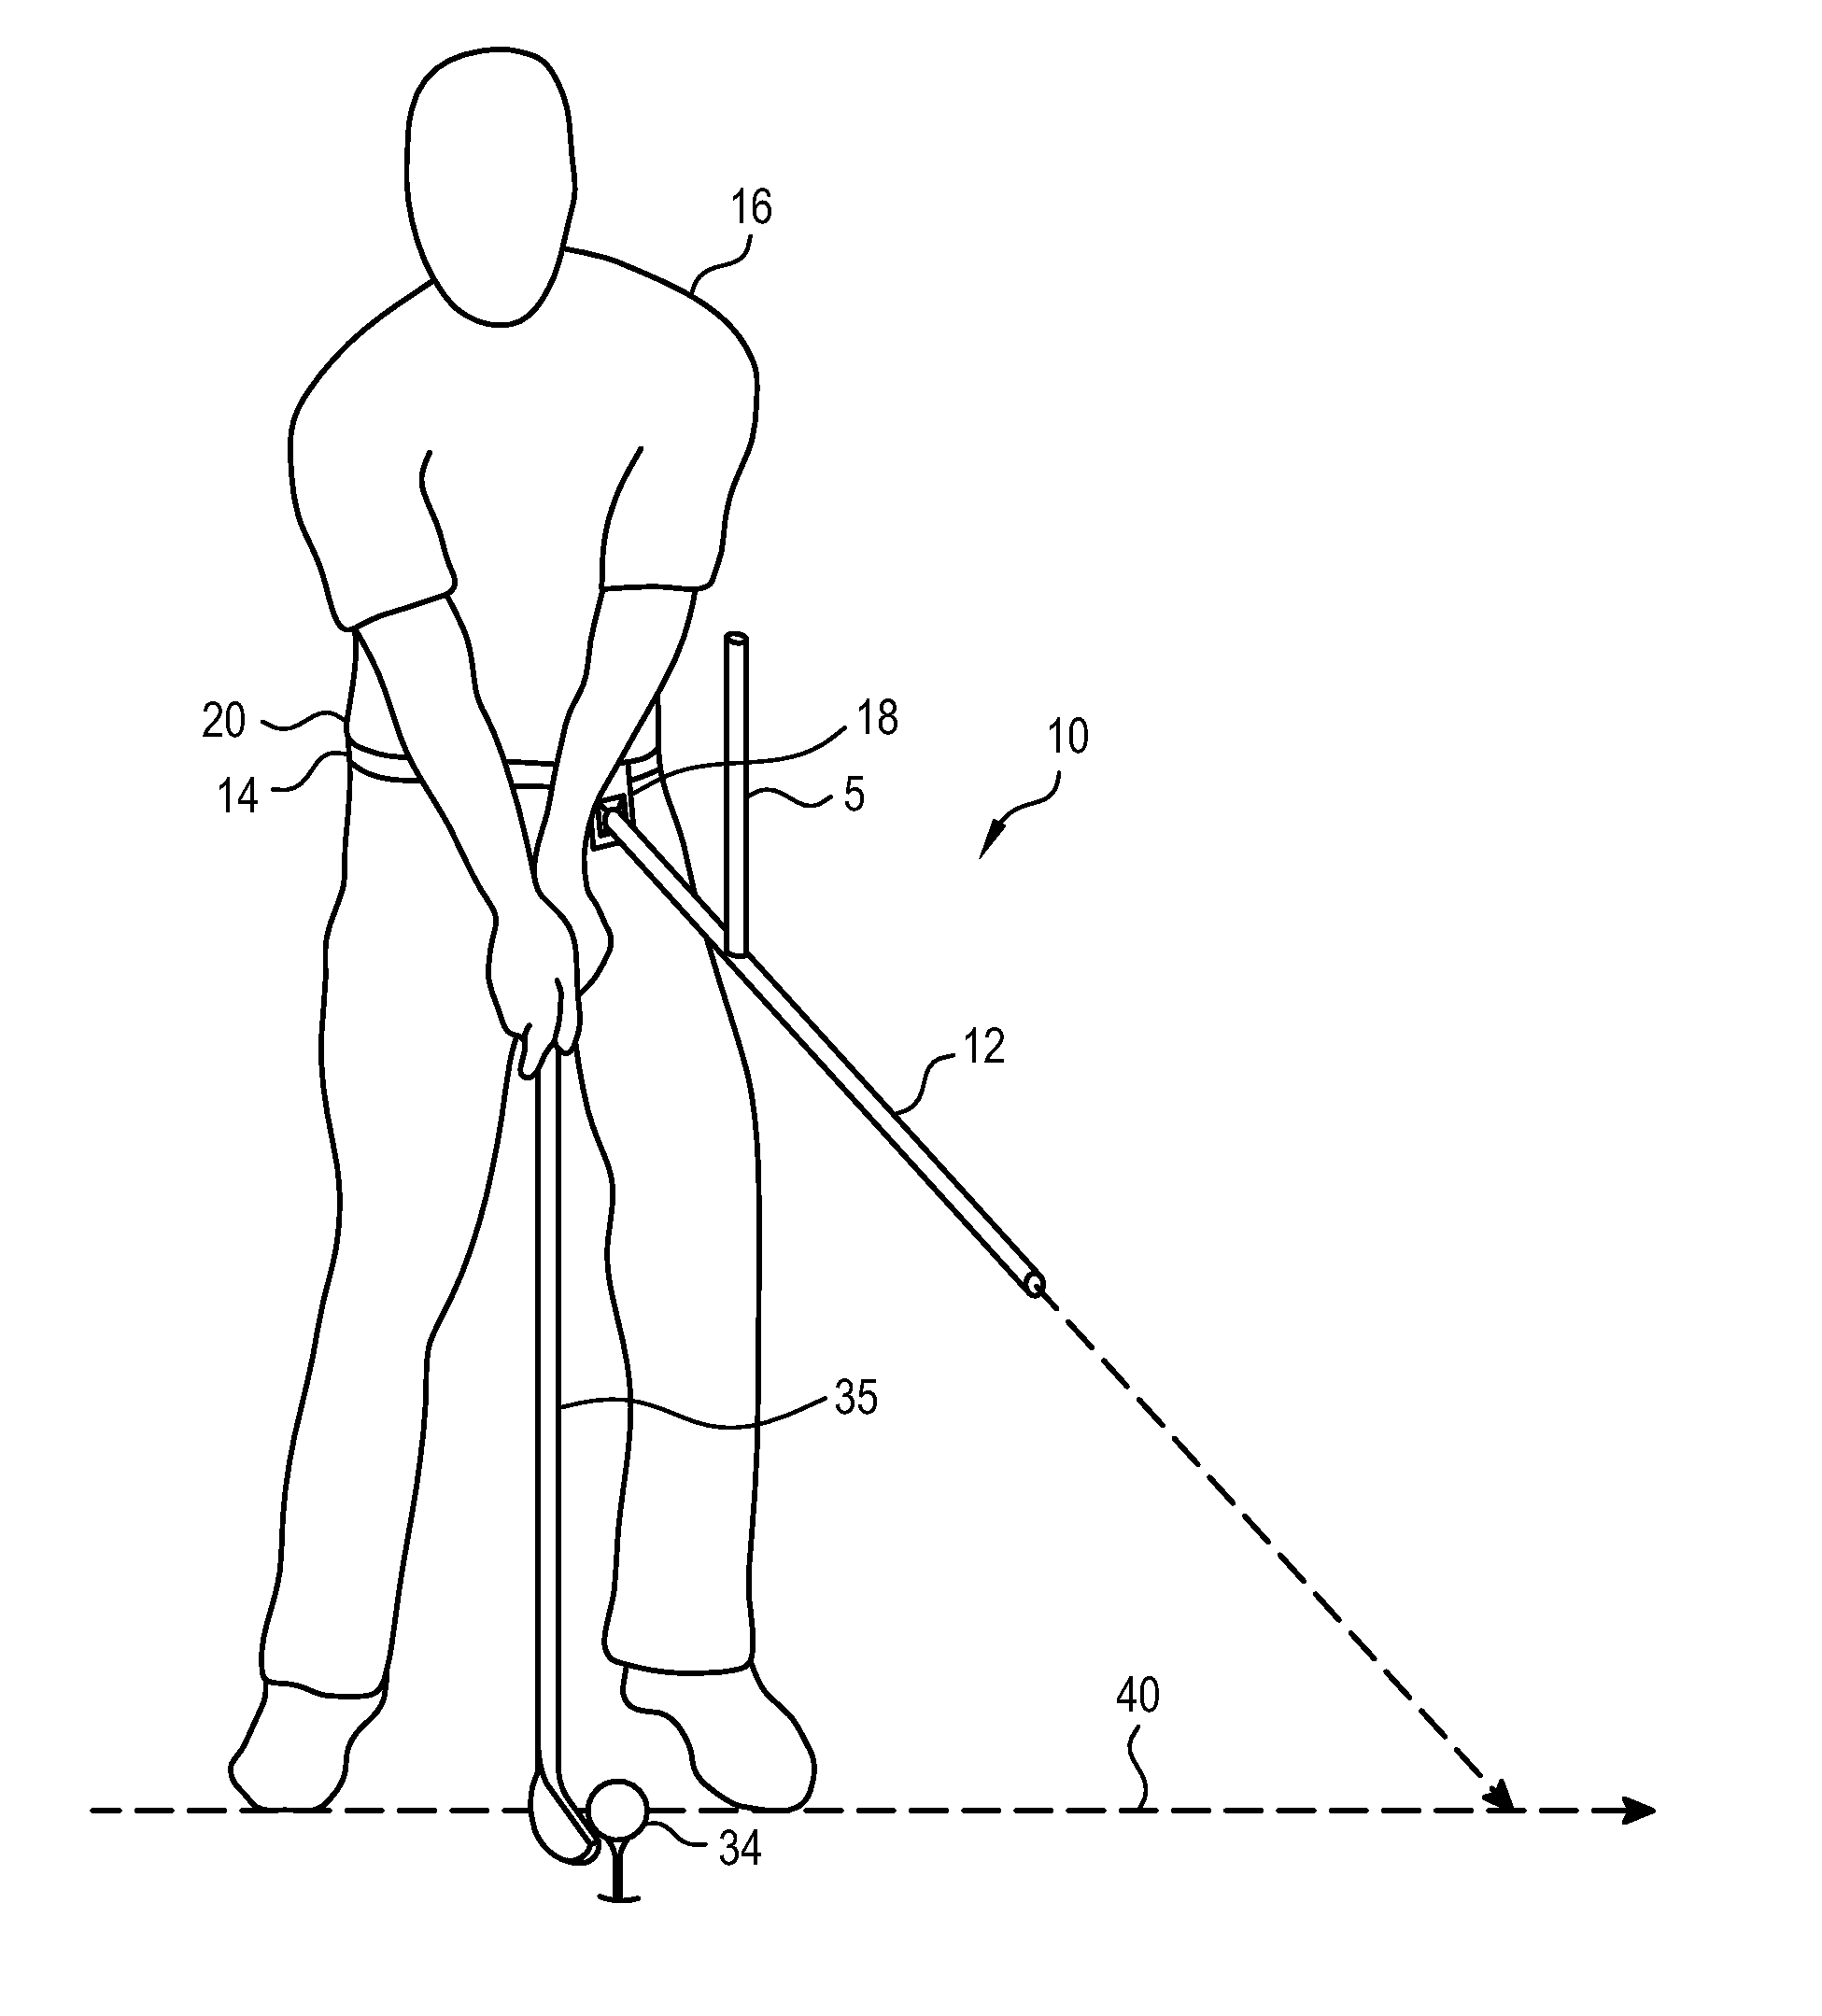 Golf Swing Training Device For Correcting Arm Position and Hip Rotation Sequence